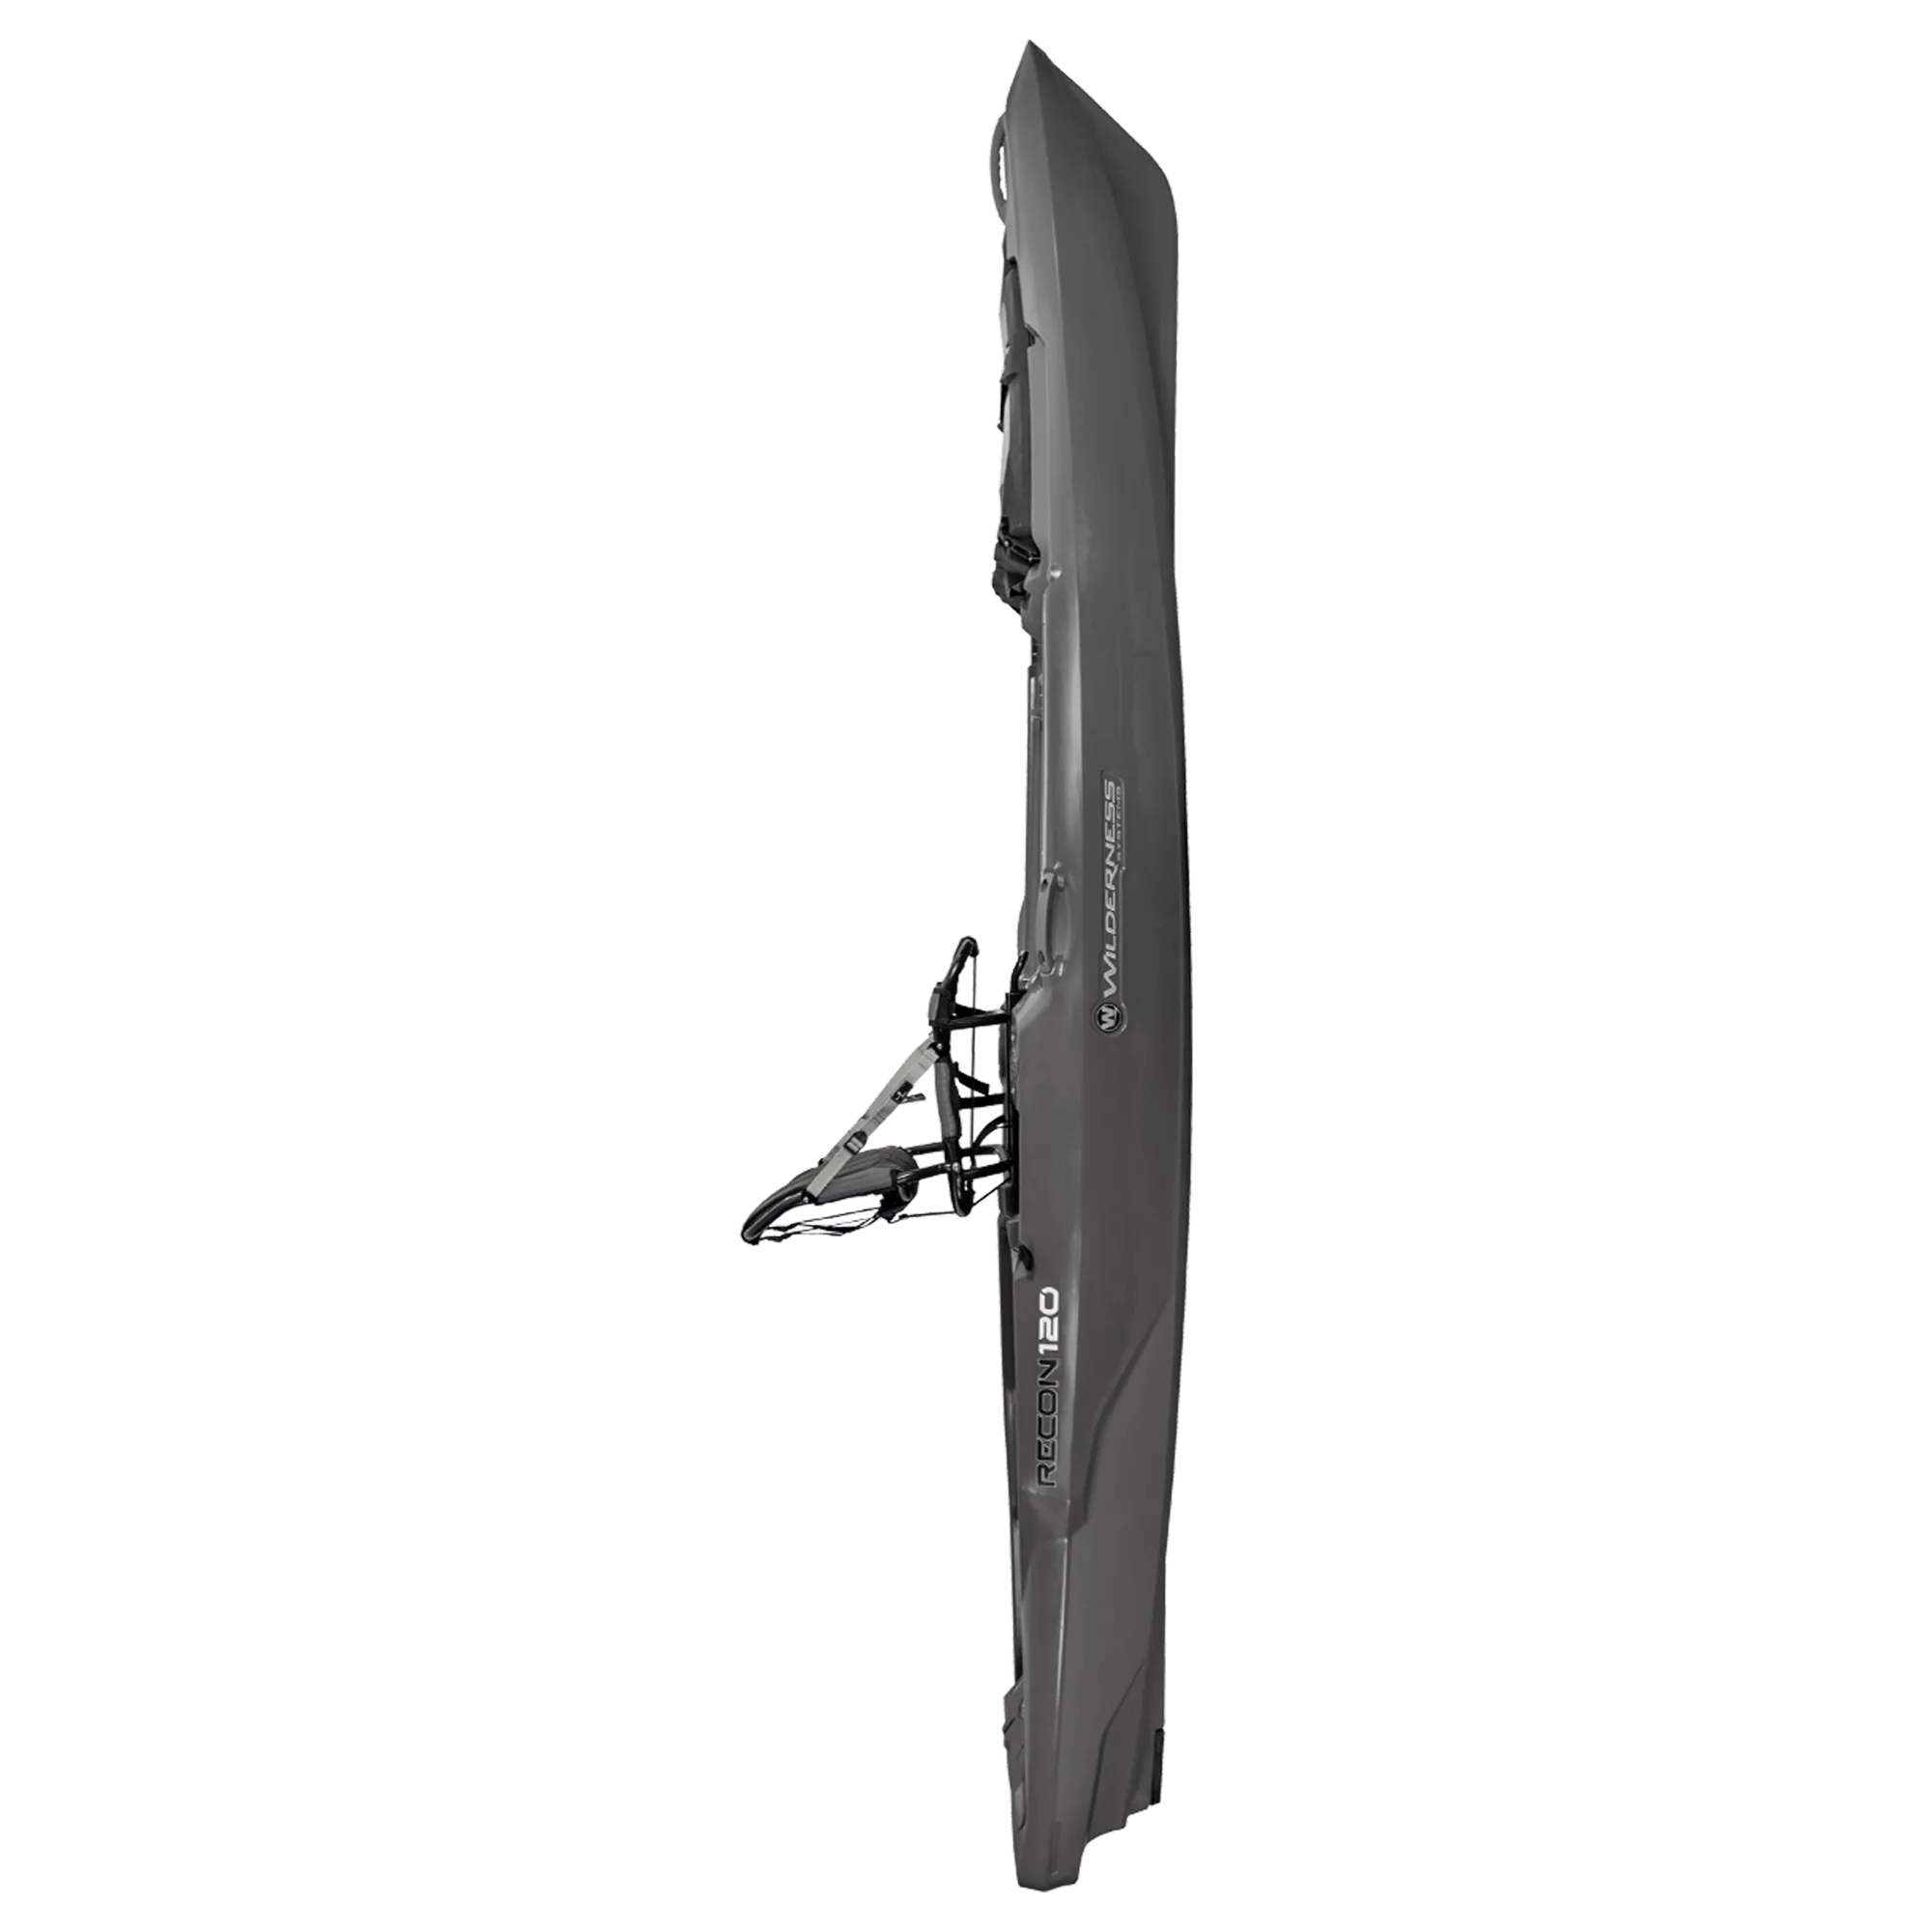 WILDERNESS SYSTEMS - Recon 120 Fishing Kayak - Discontinued color/model - Grey - 9751100153 - SIDE